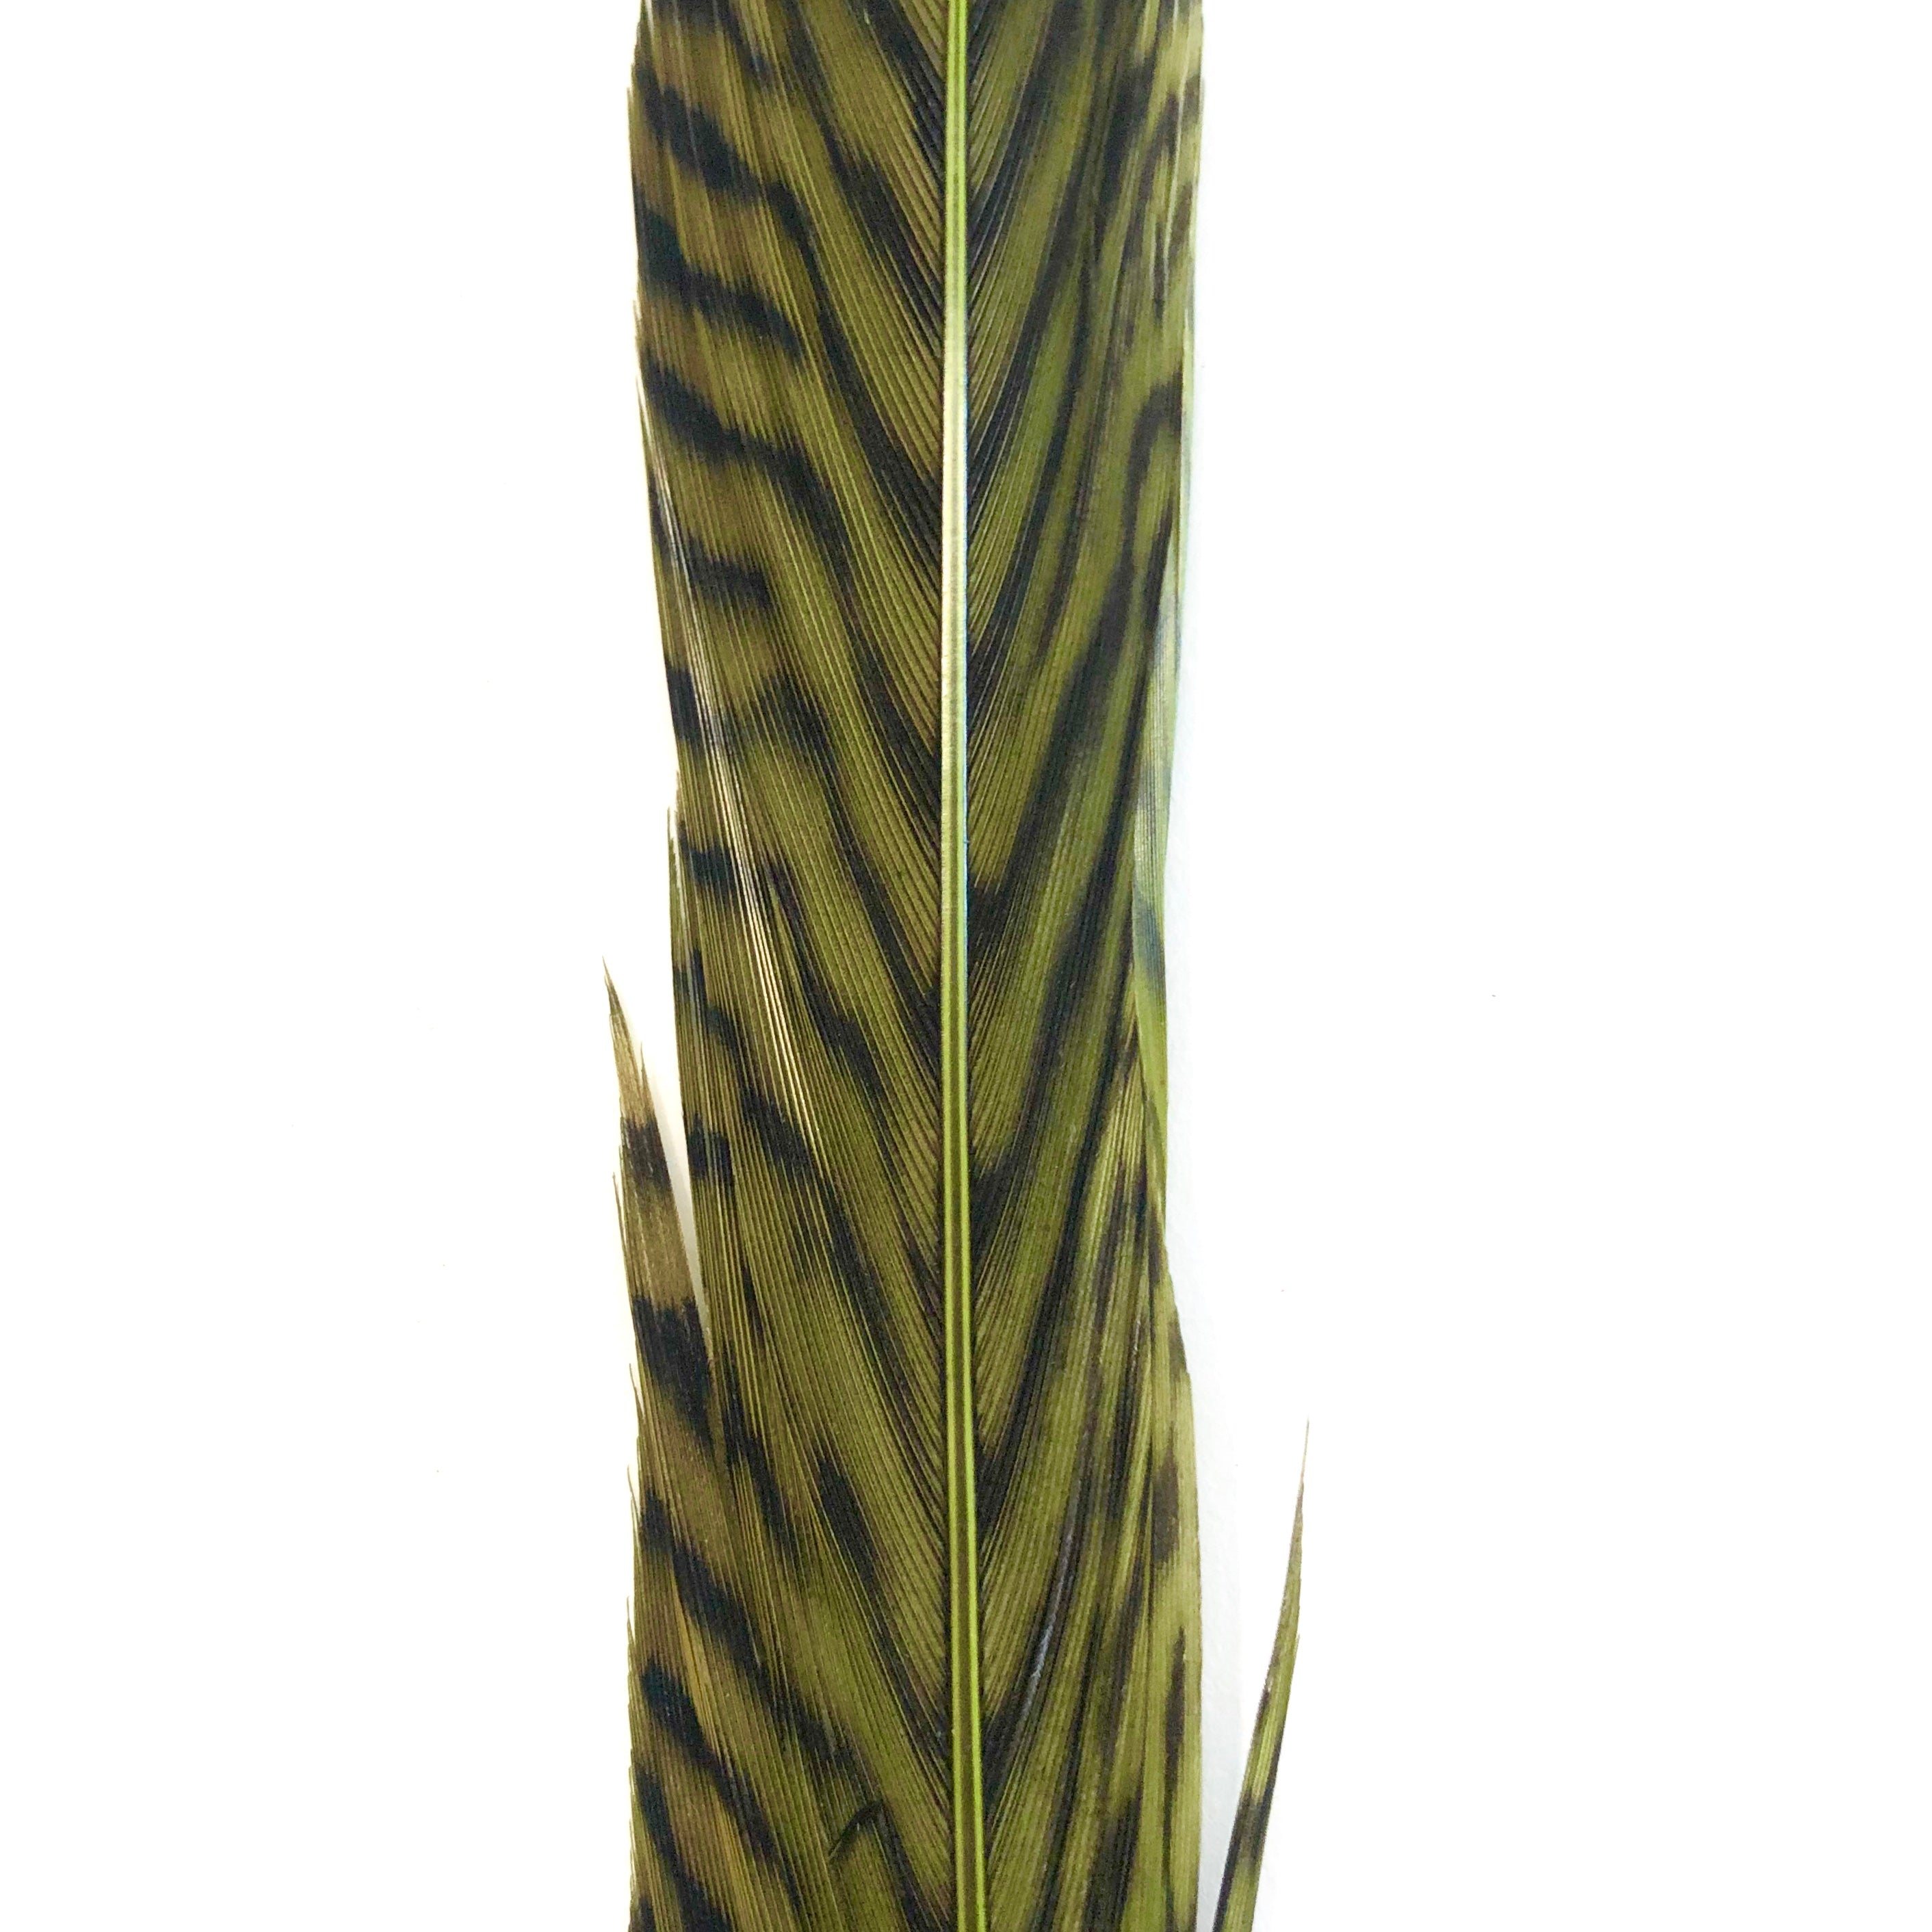 20" to 30" Golden Pheasant Side Tail Feather x 10 pcs - Olive Green ((BULK PACK))